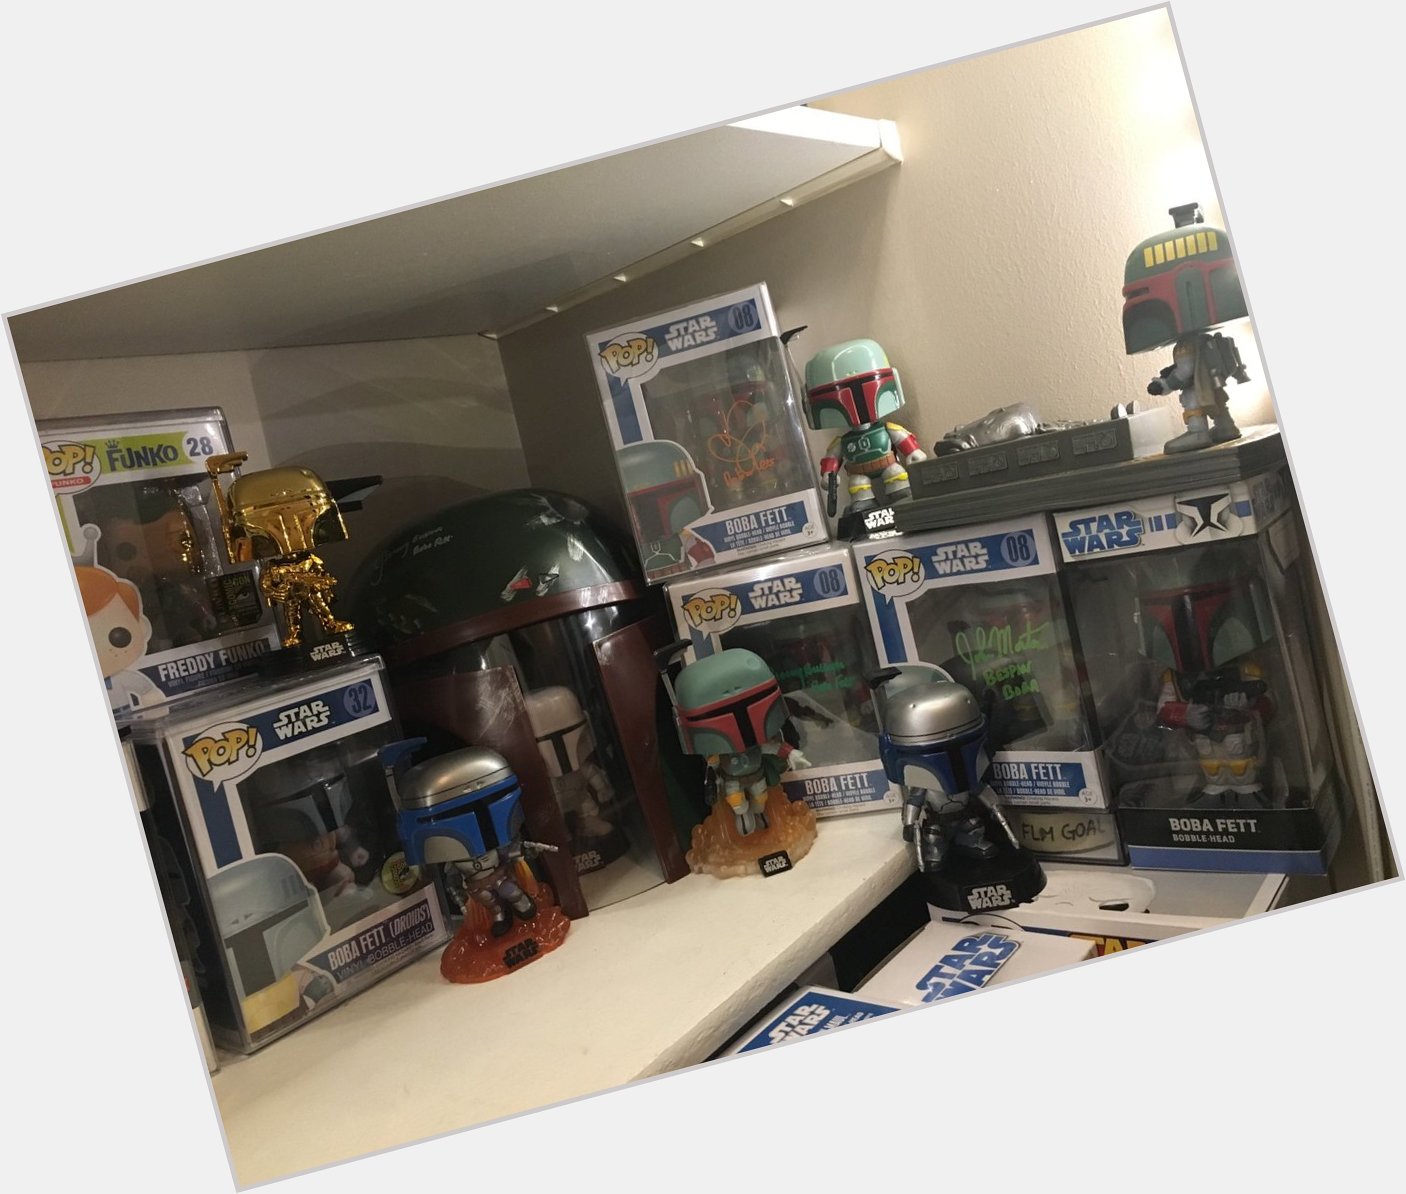  happy birthday Boba! Check out my Funko Fett collection! Cheers!!!! 